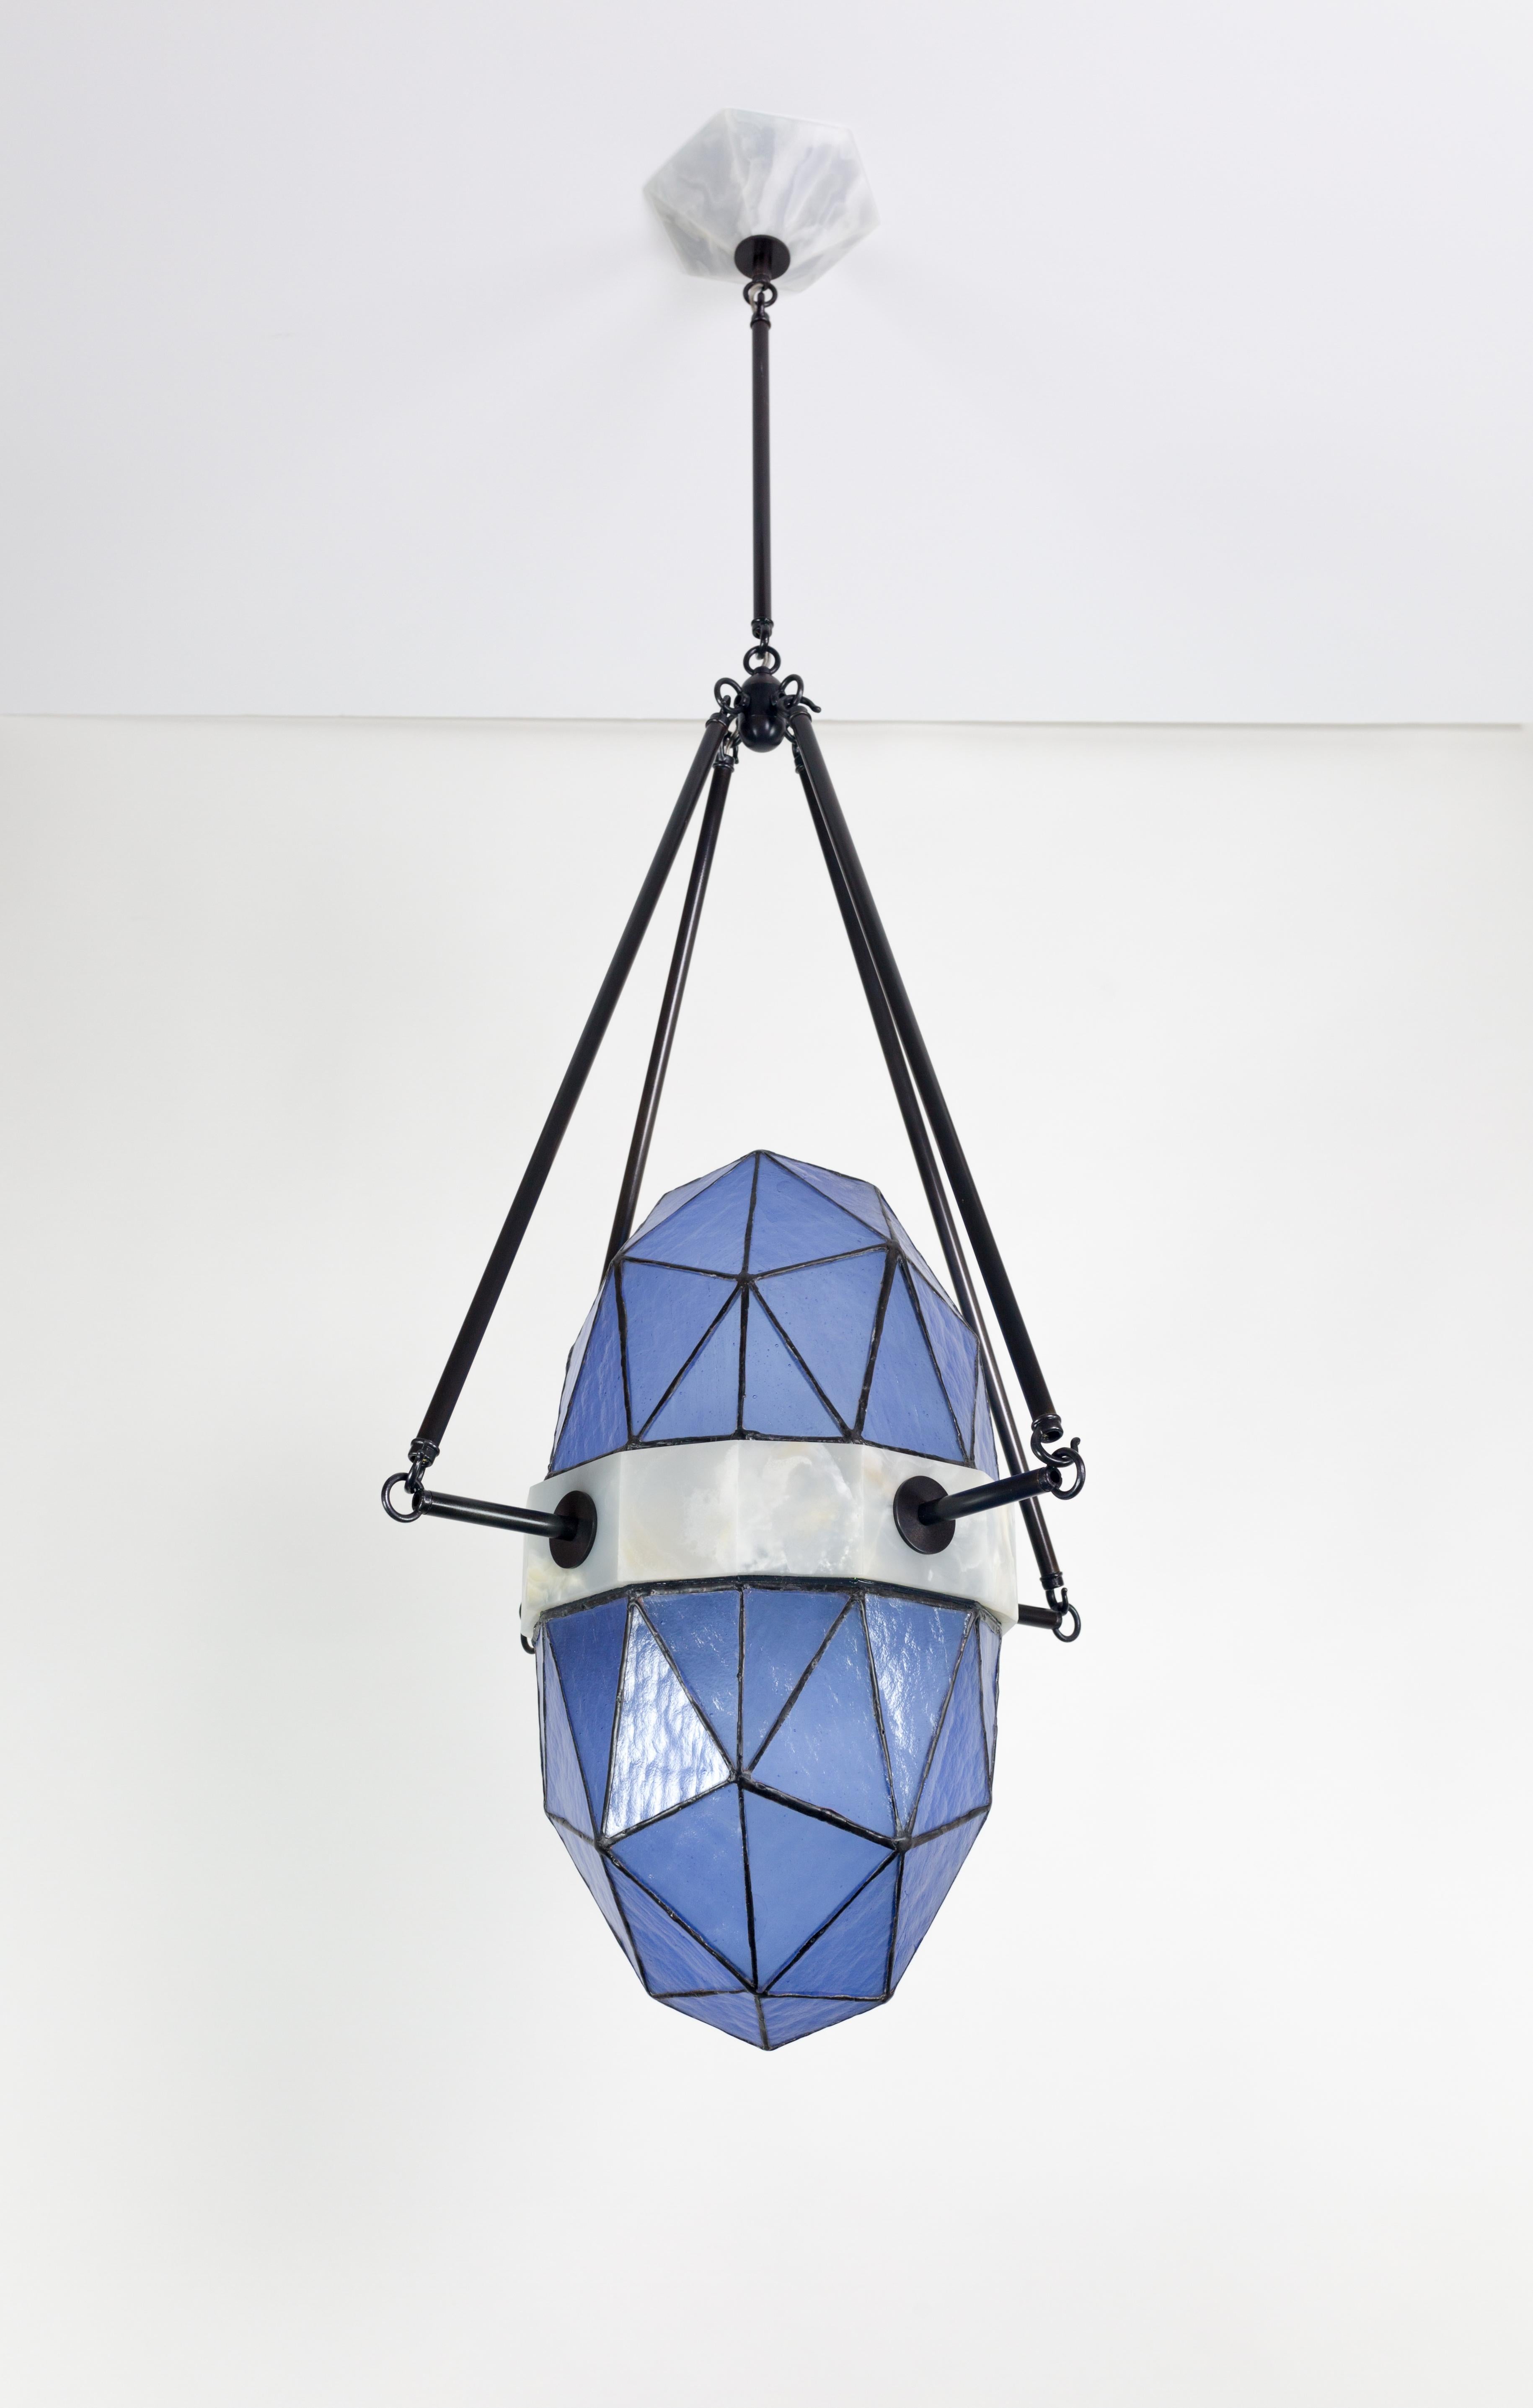 Kalin Asenov designs and fabricates lighting in Savannah, GA. Asenov works with a team of artisans and manufacturers to prototype, and build all pieces in his studio.
 
Asenov’s designs are driven by narrative; every object is an expression of a